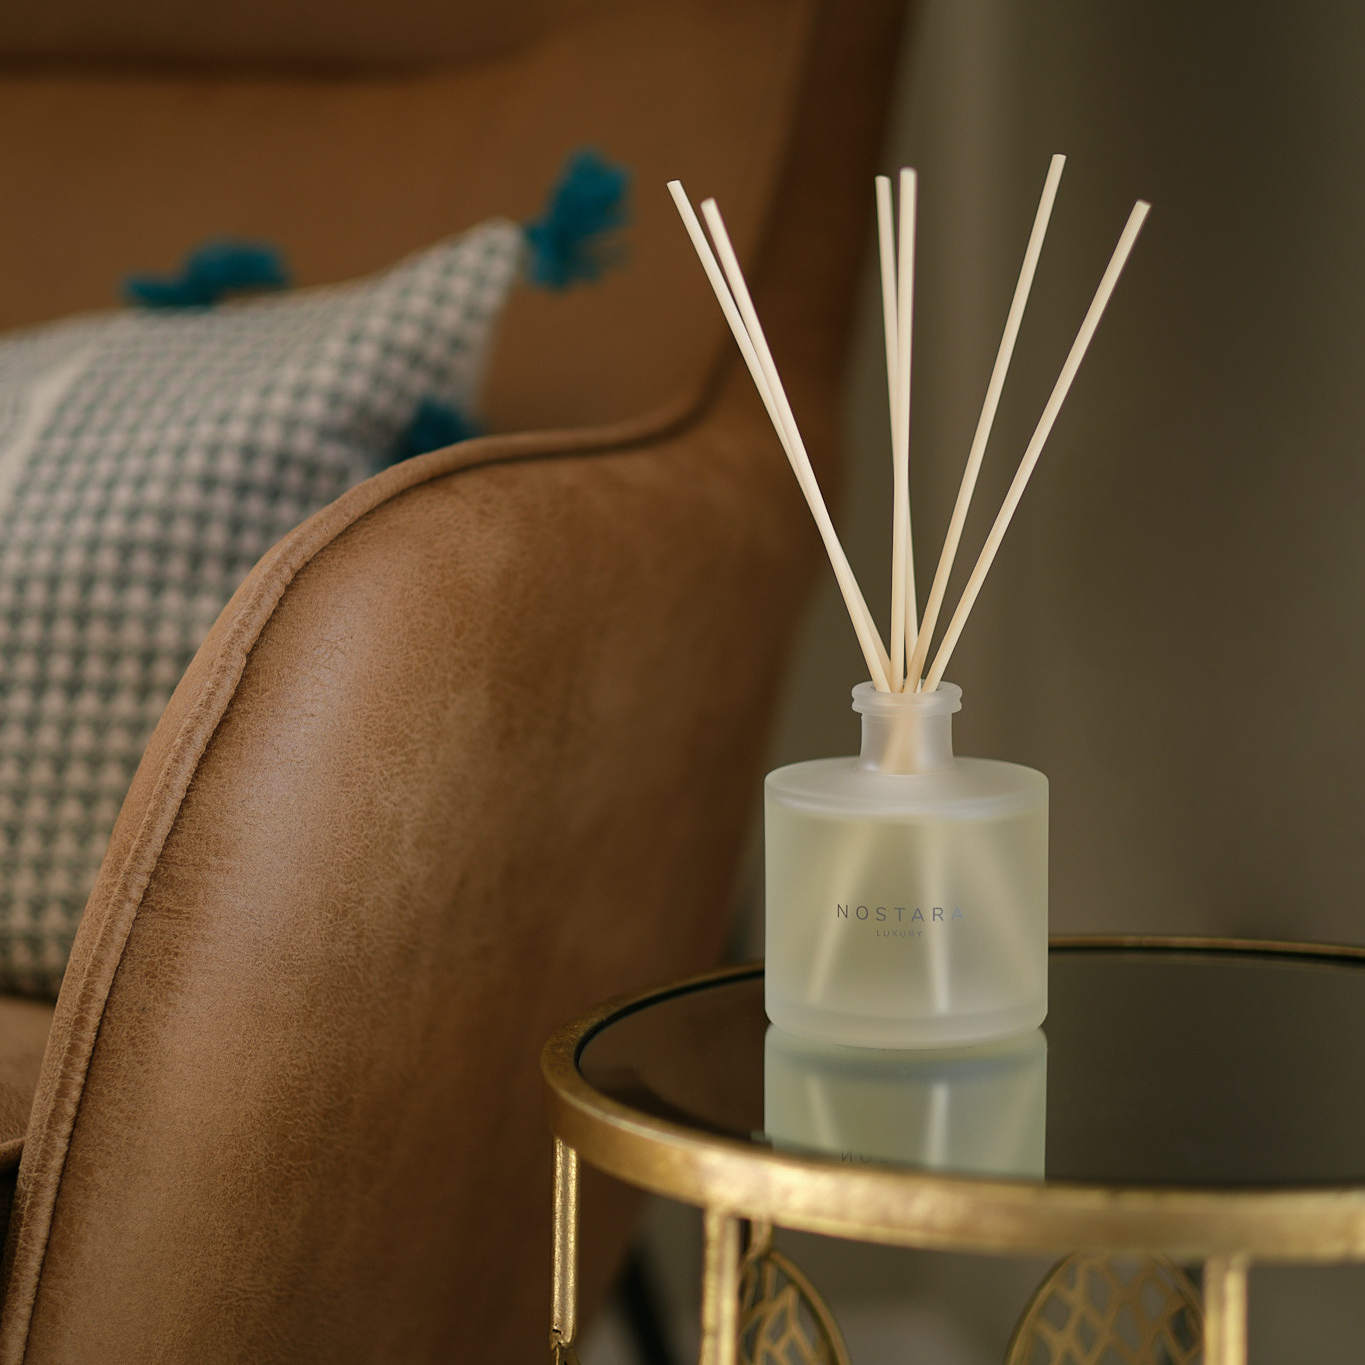 Nostara scented reed diffuser on glass table next to leather chair